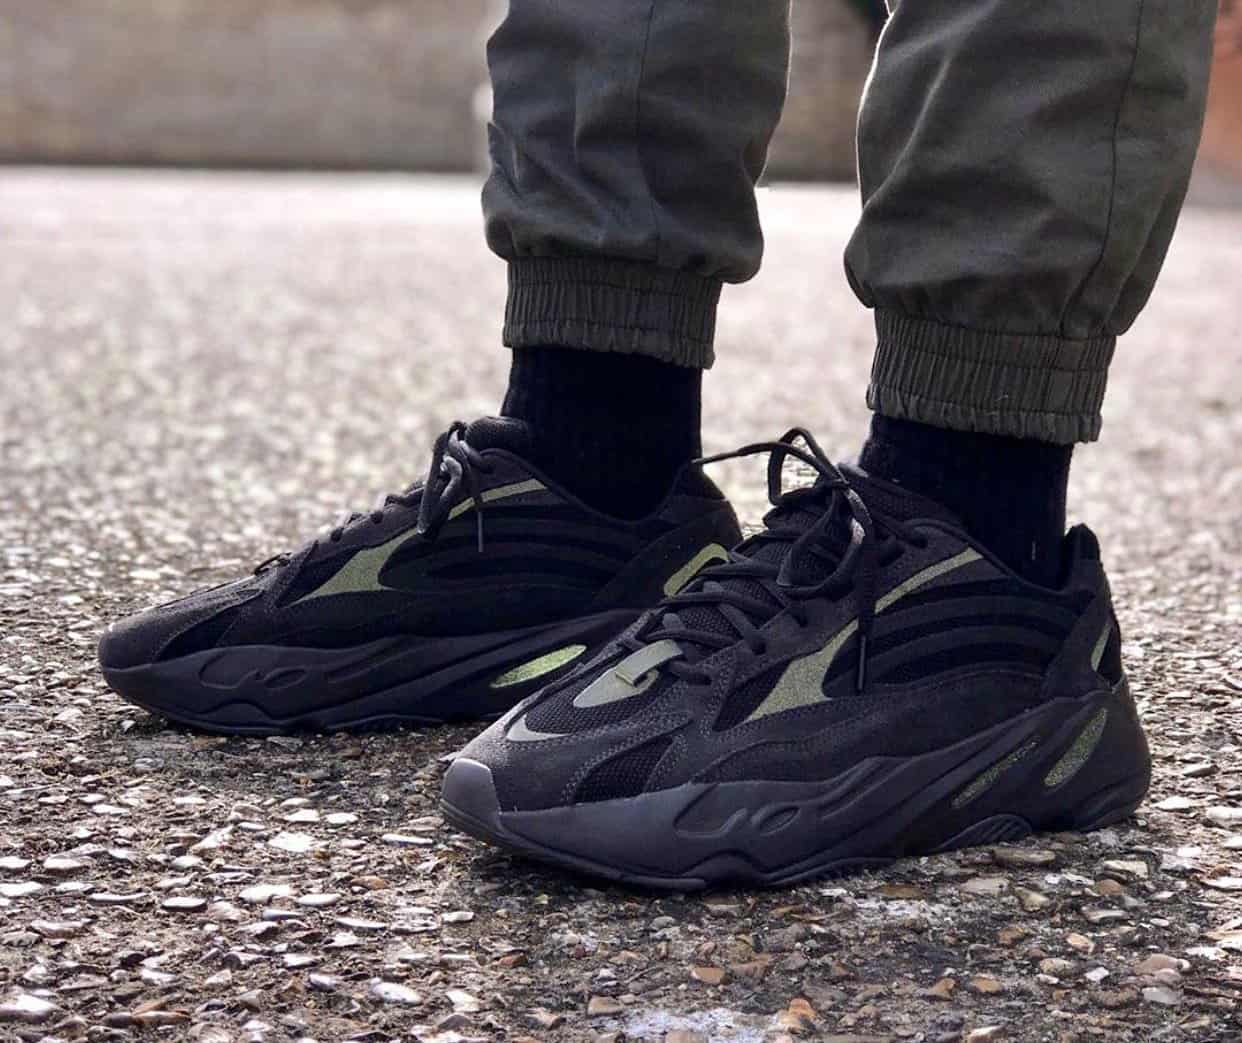 How To Spot Fake Yeezy Boost 700 V2 